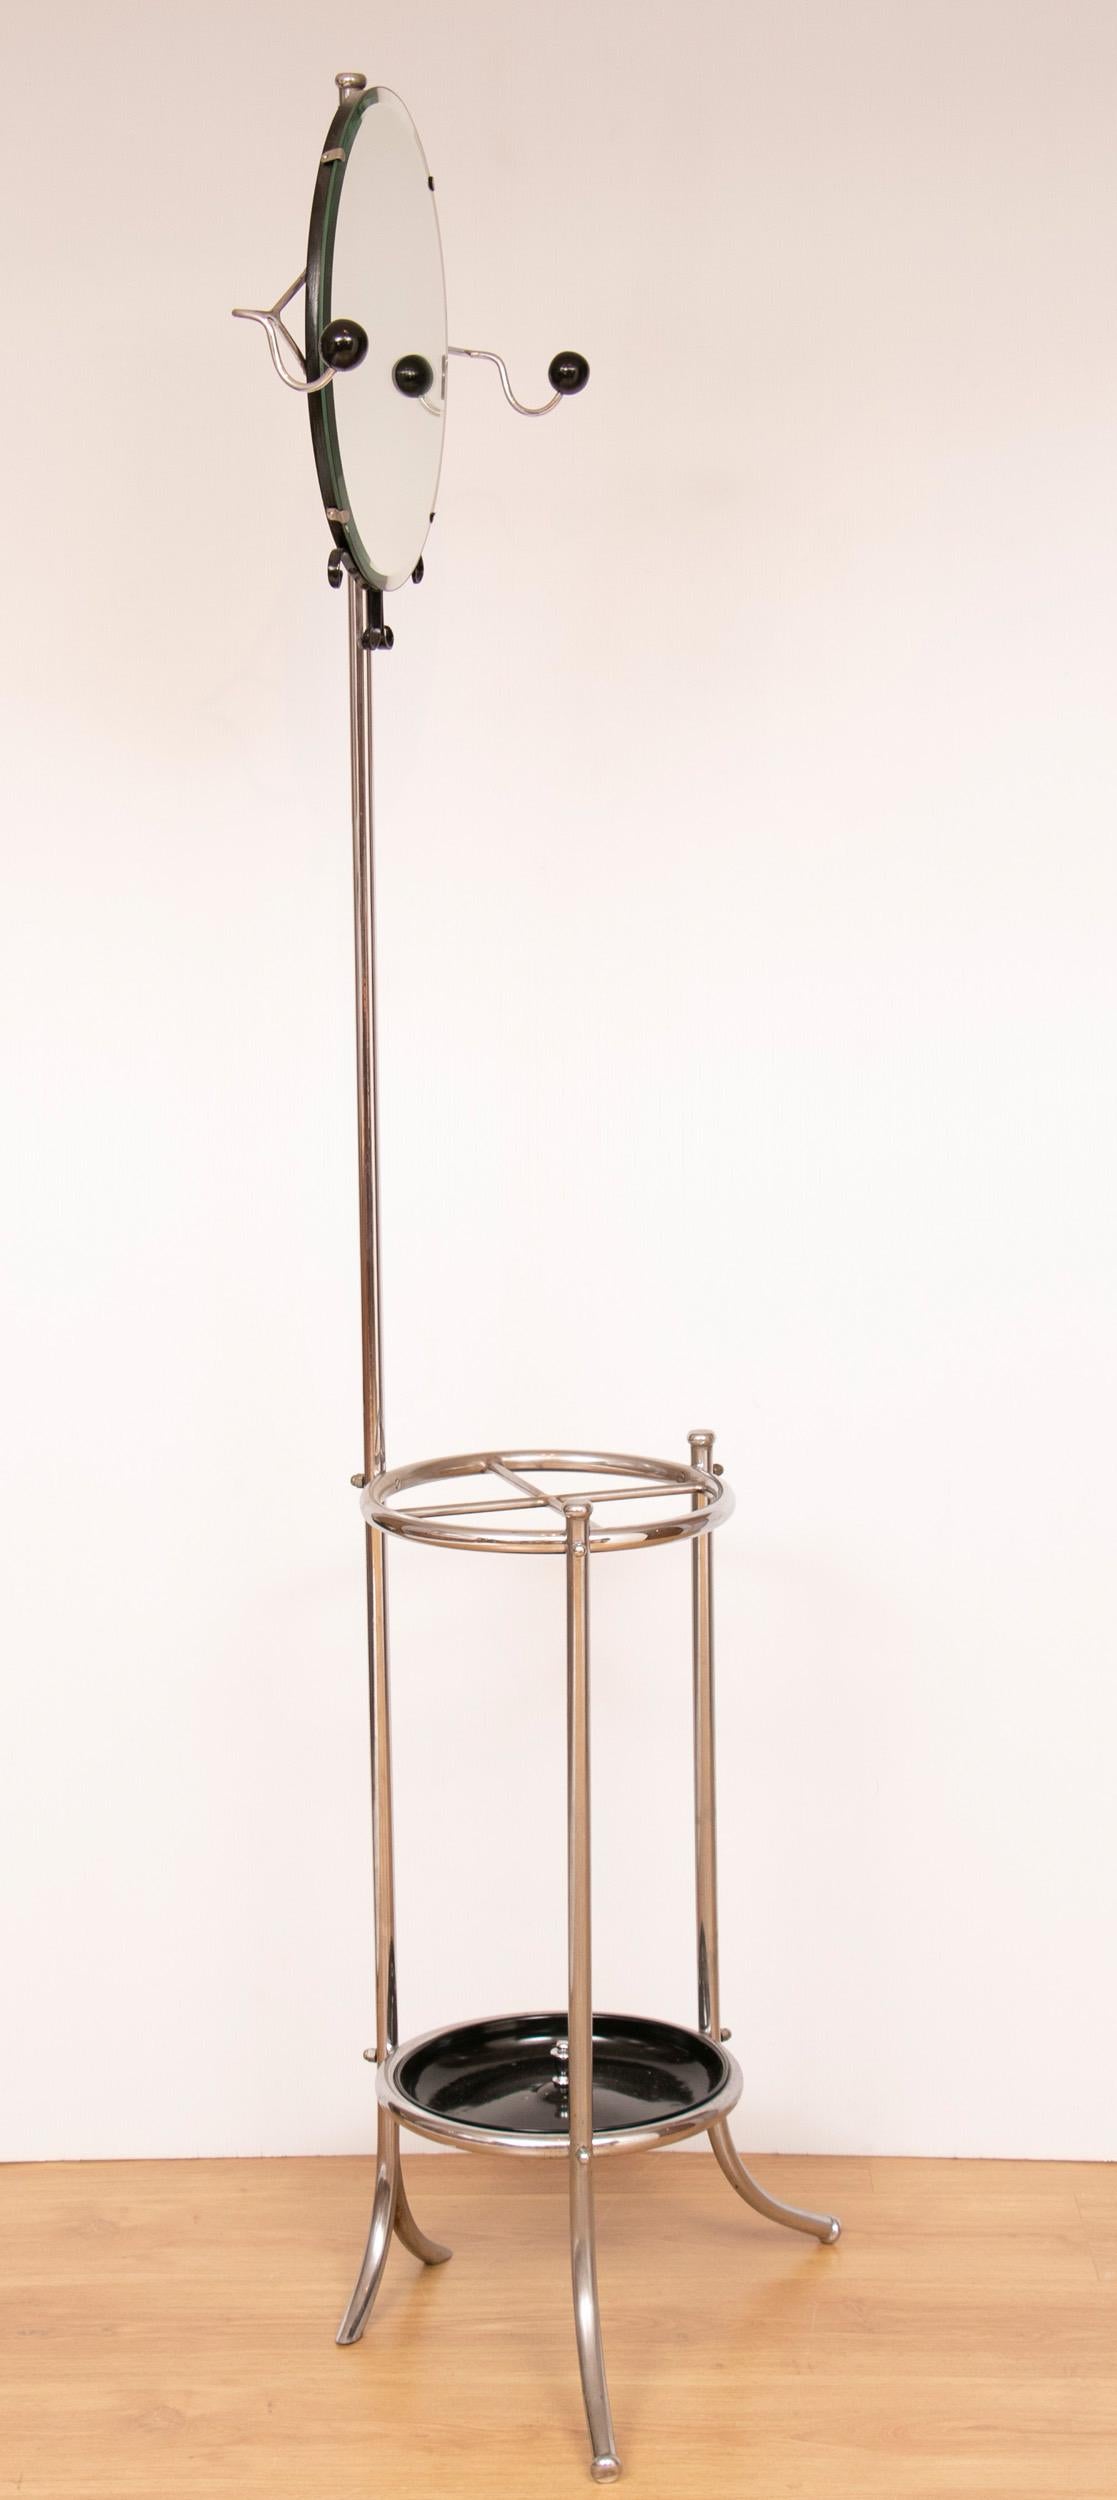 Bauhaus hall umbrella stand
Art Deco hall stand, tubular chrome with black painted metal, funky mirror with coat holding knobs.
Measures: H 181 cm, W 60 cm, D 34 cm
Germany, circa 1930.